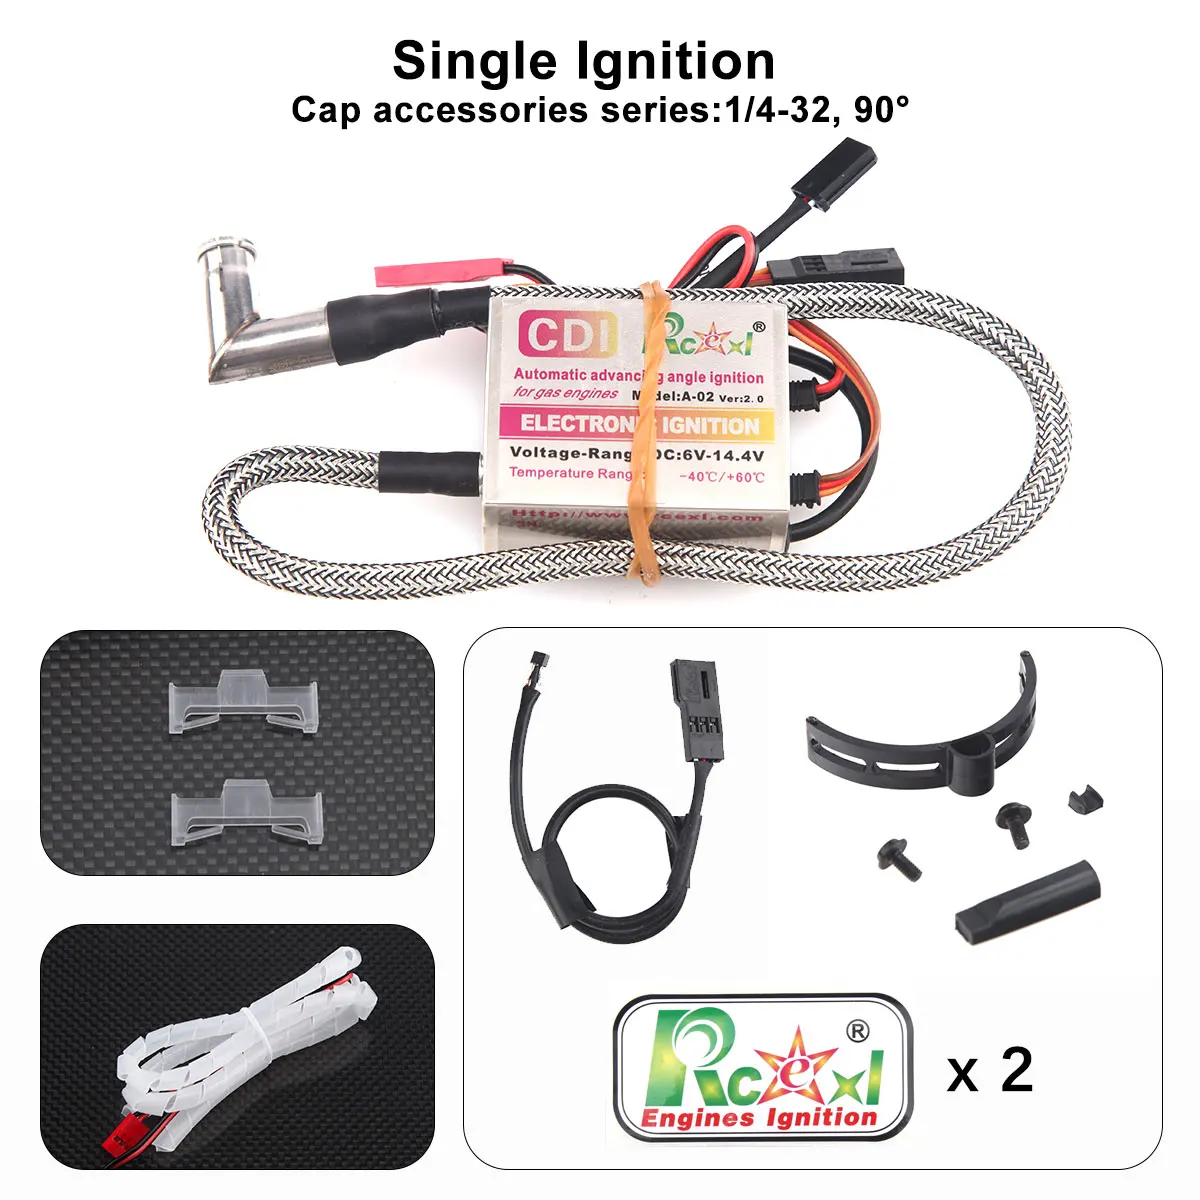 RCEXL Single Cylinder Ignition NGK-ME-8 1/4-32 CDI Igniter 90/120/180 Degrees Cap with Hall Sensor for RC Airplane Gas Engine enlarge